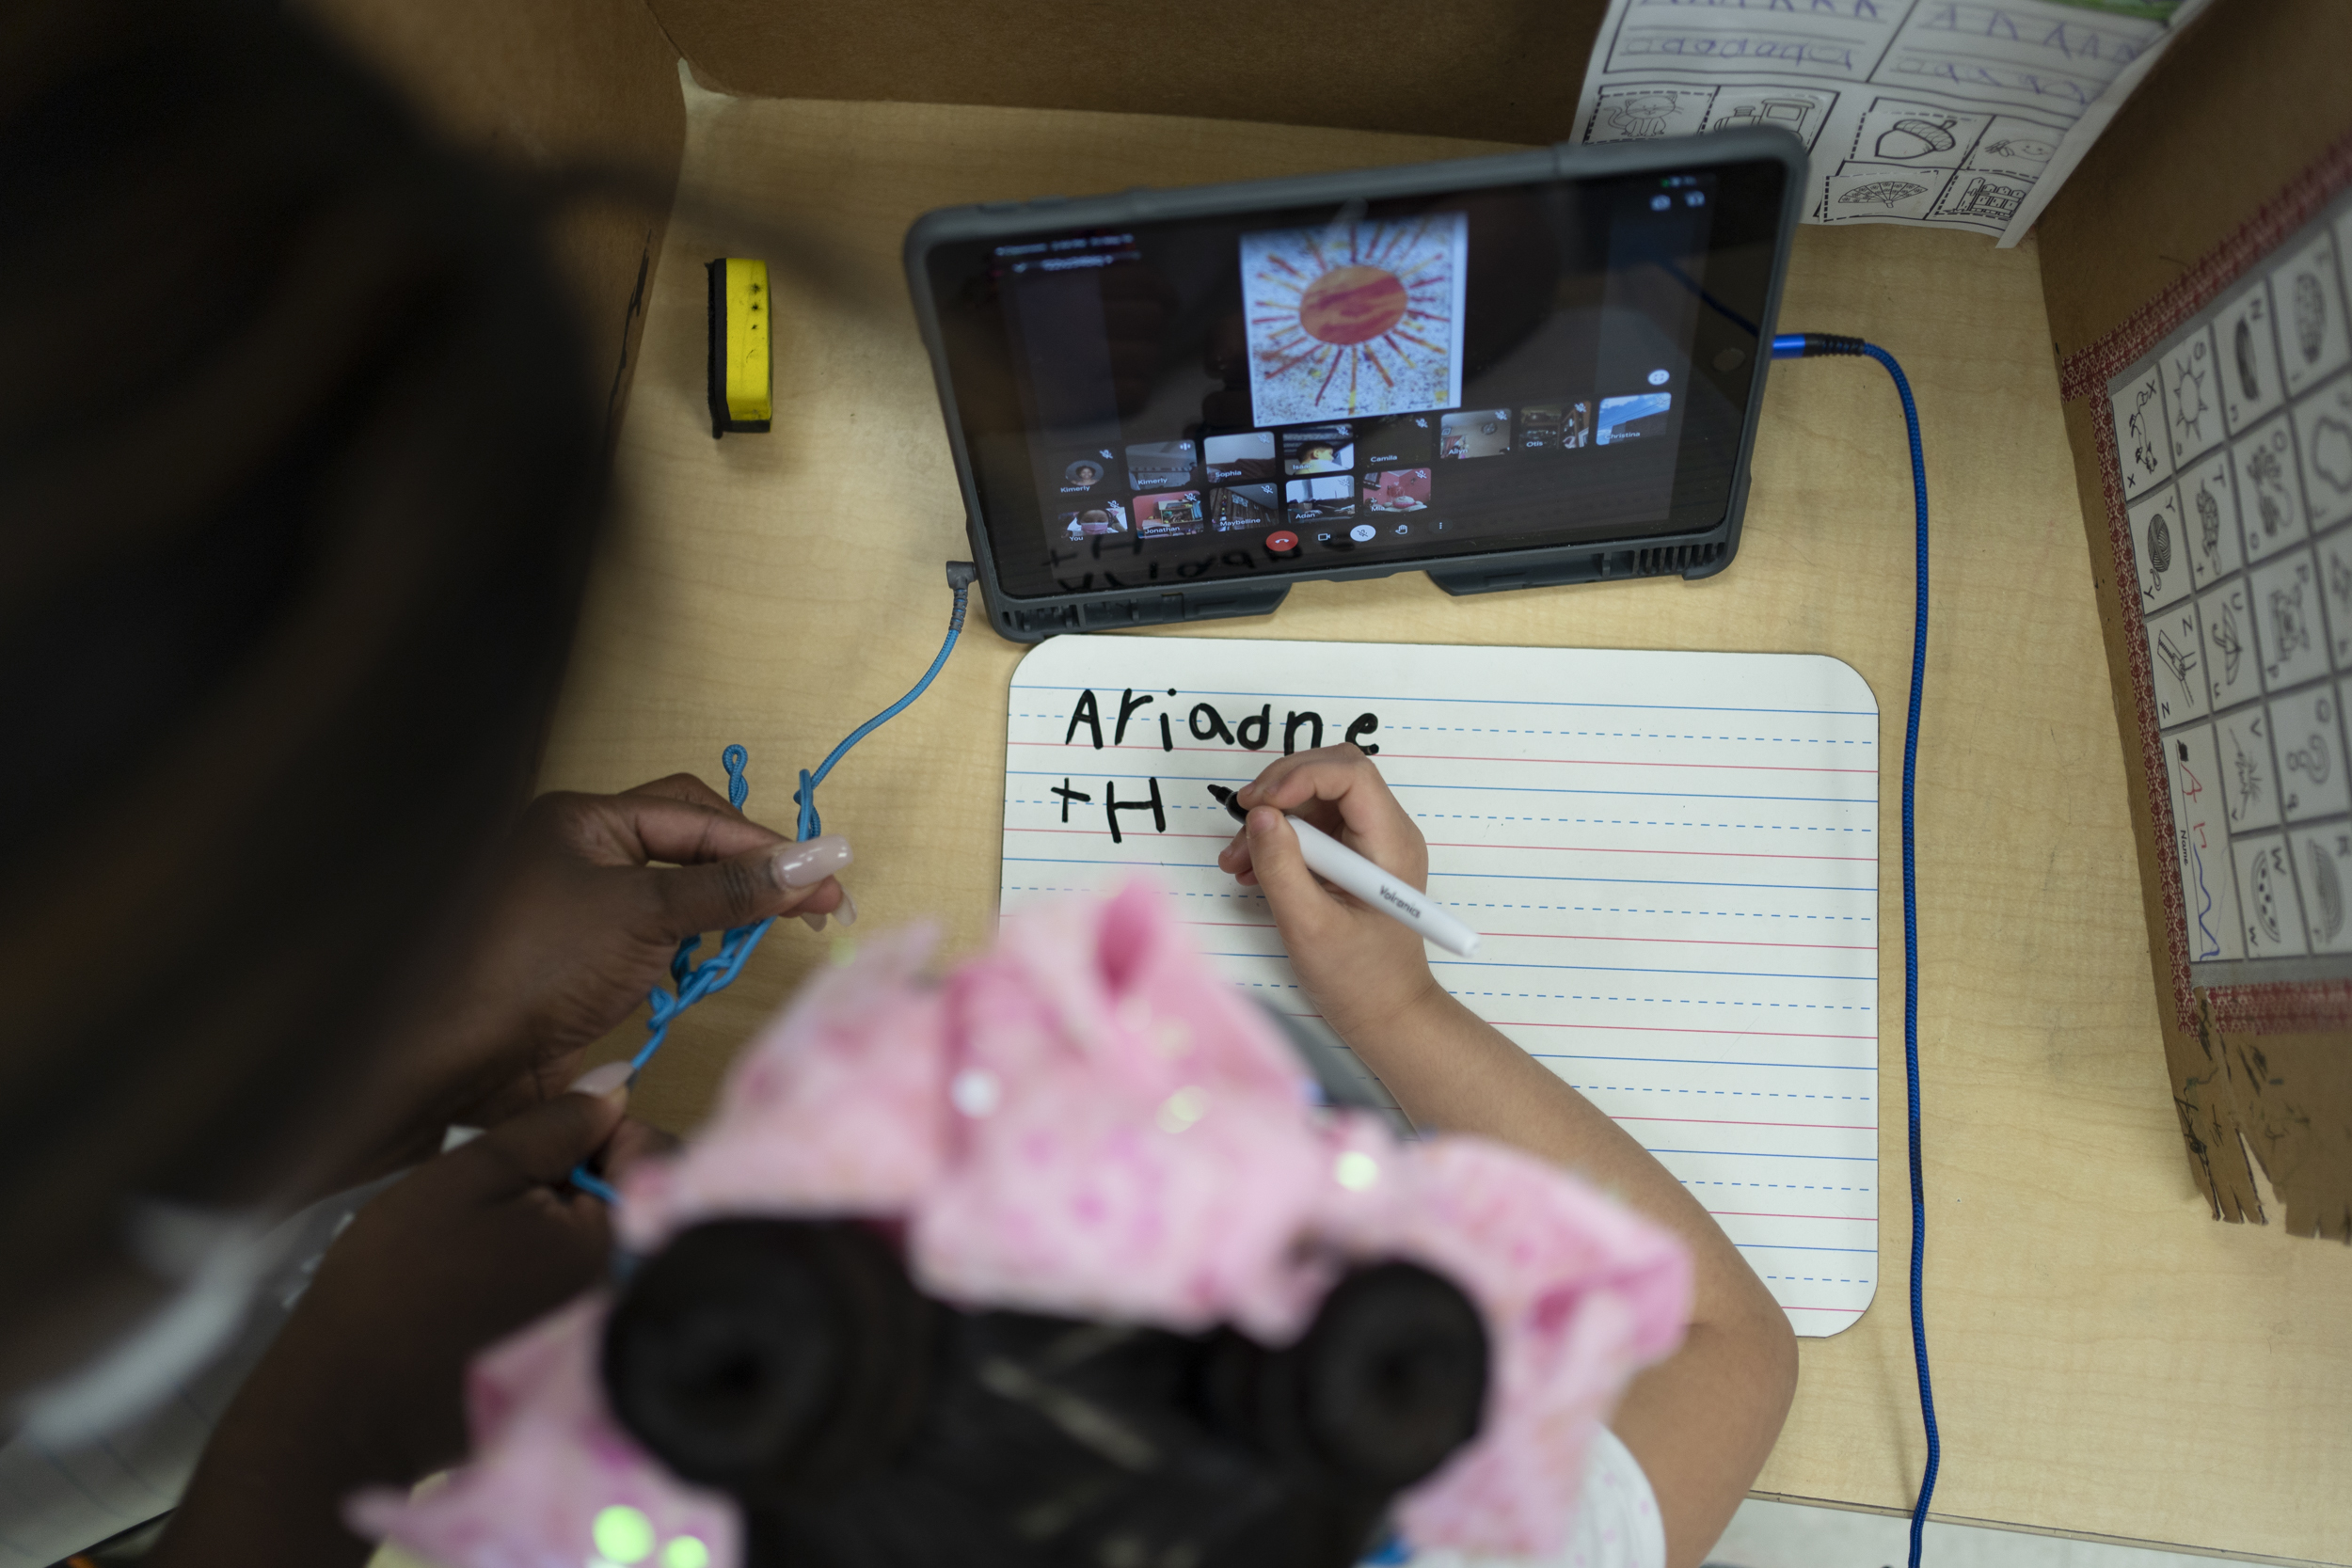 A girl wearing a pink bow works on a writing assignment while a teacher looks over her shoulder. There is a tablet on the desk in front of her.